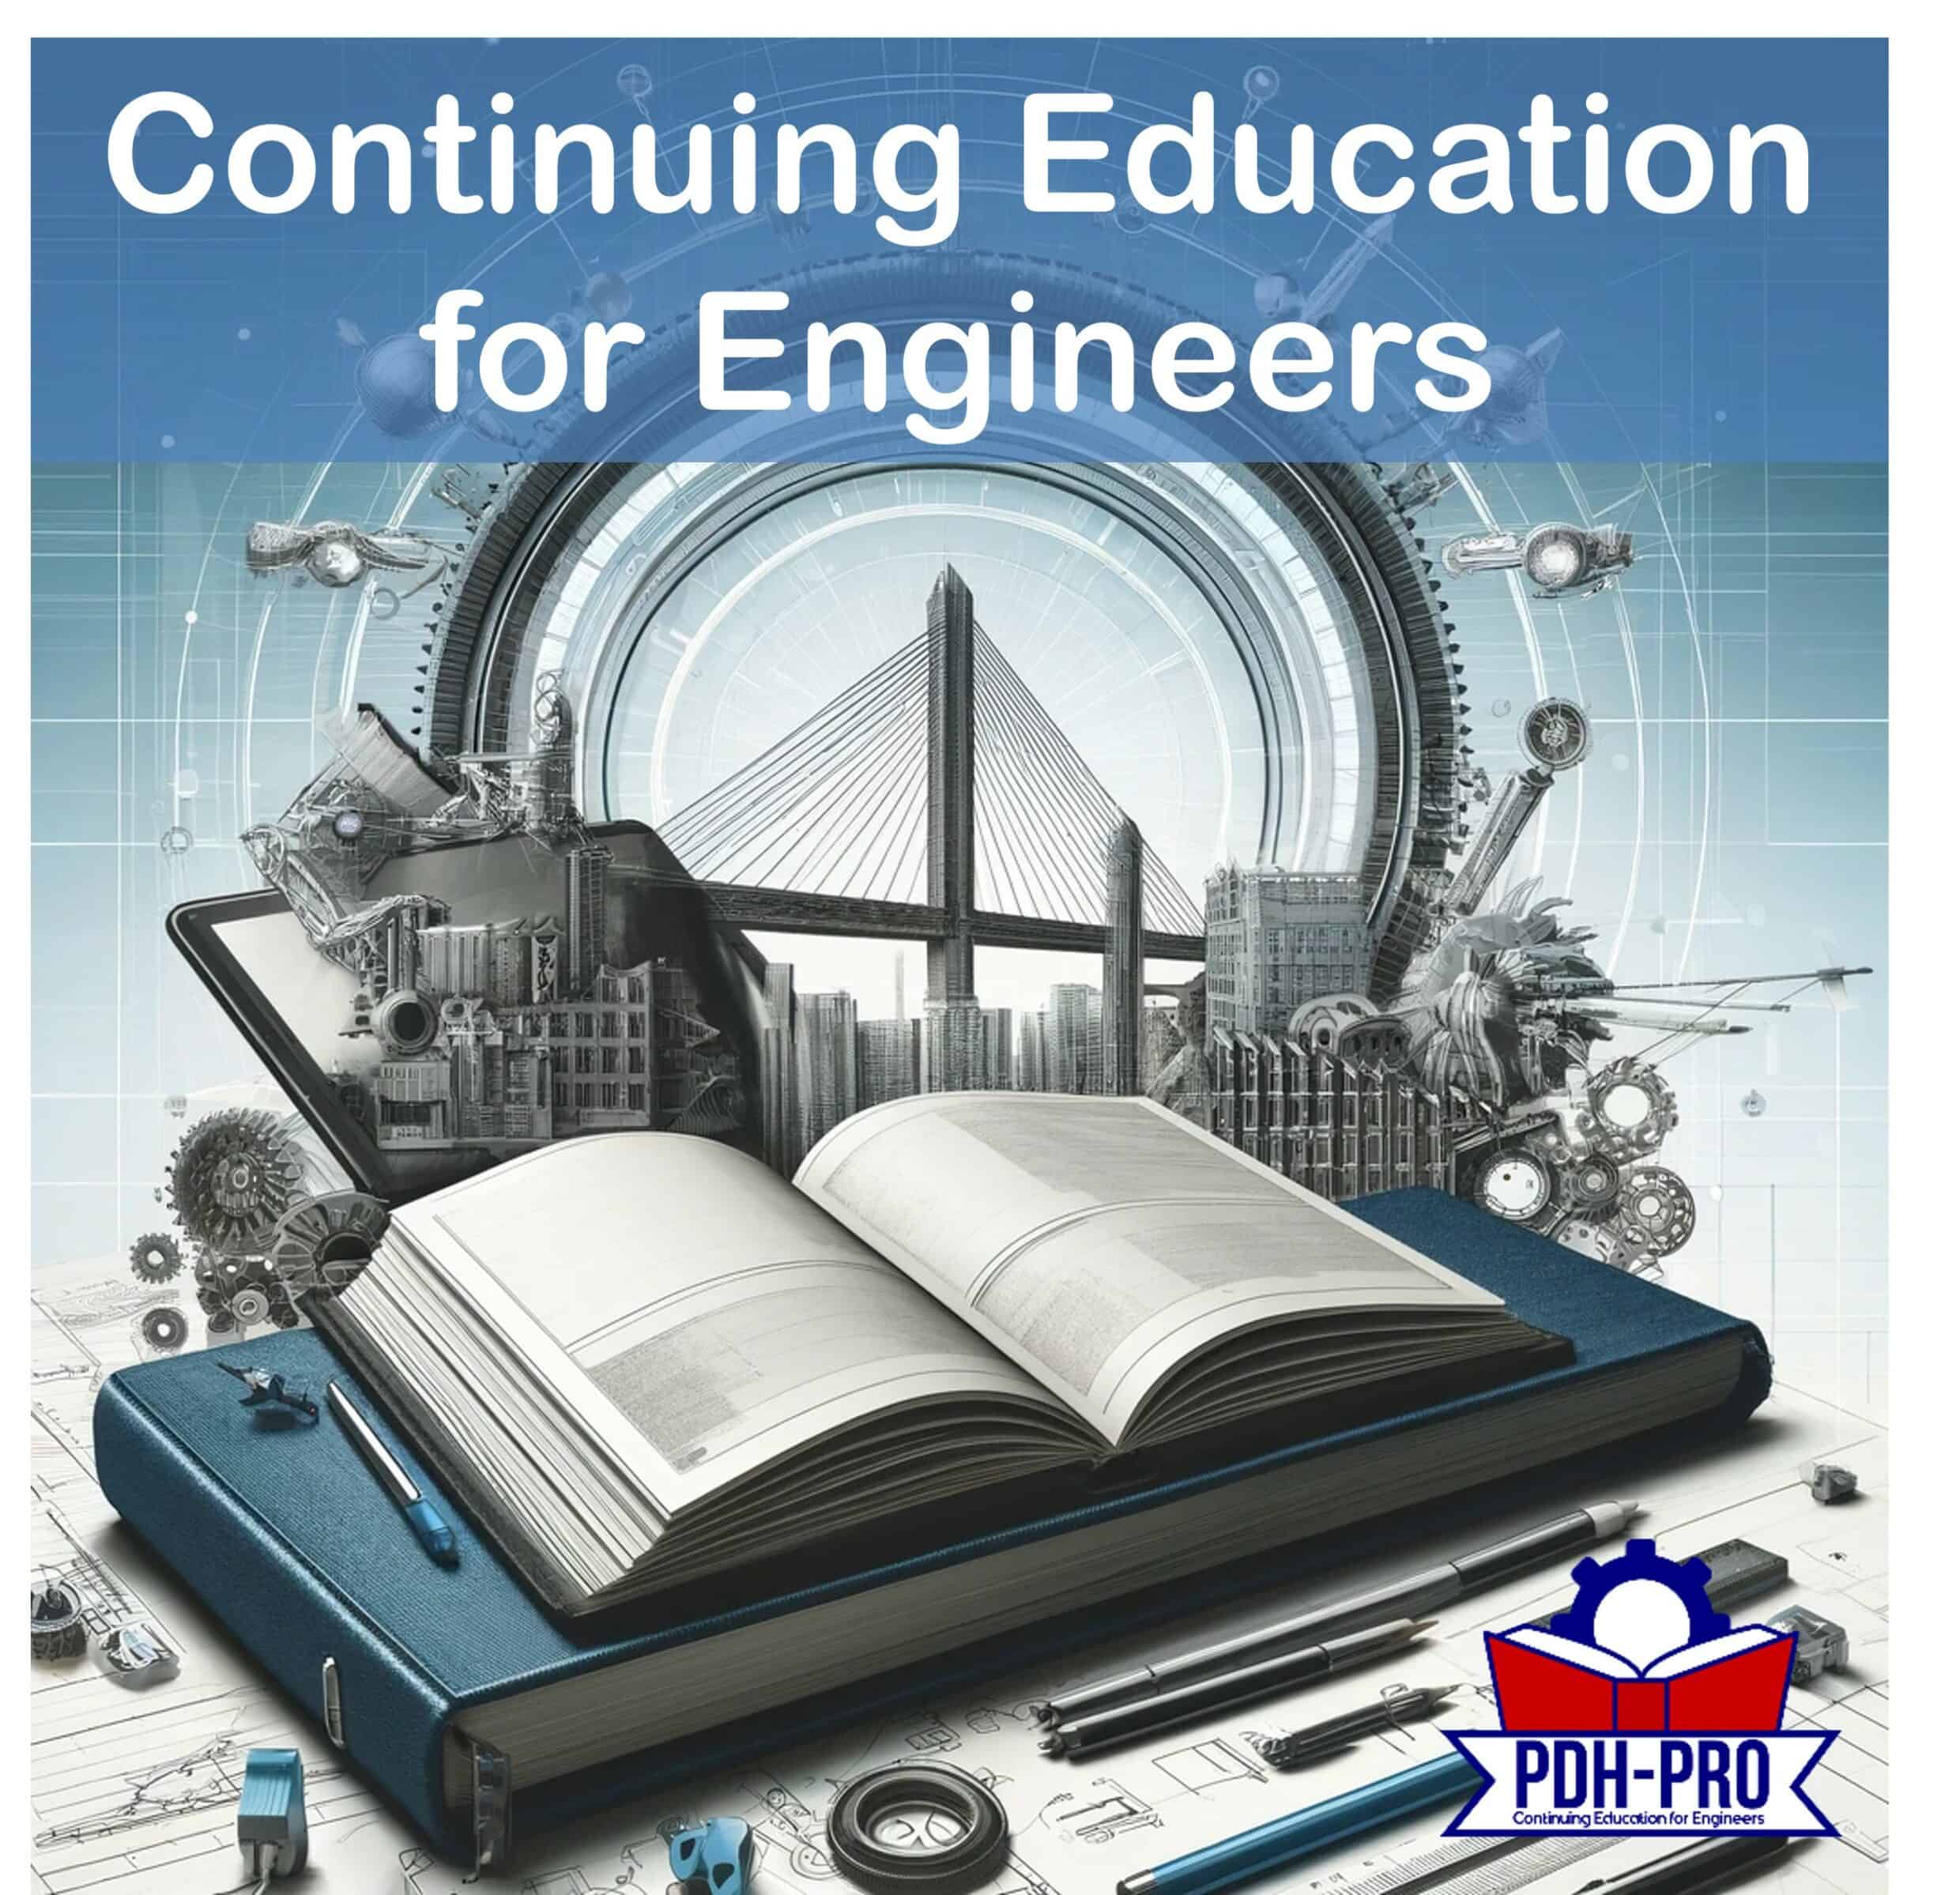 Continuing Education for Engineers